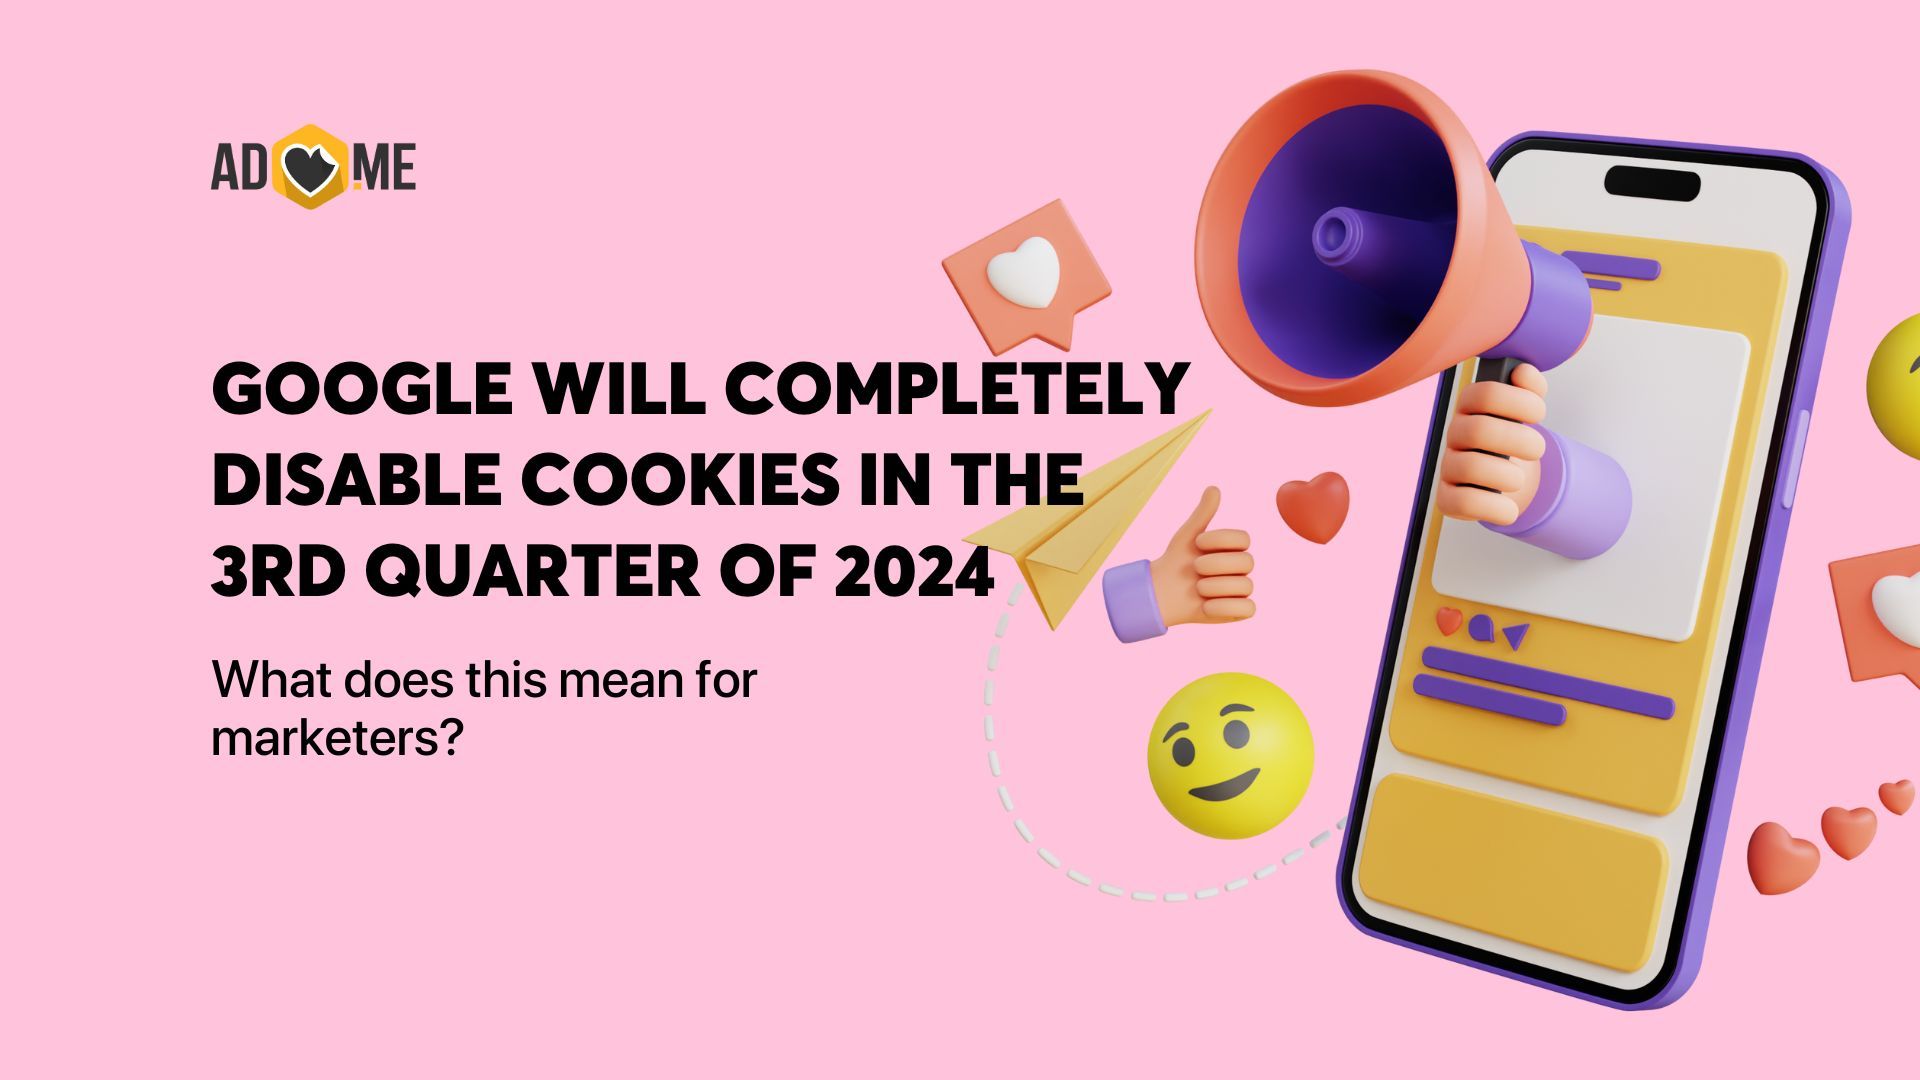 Google will completely disable cookies in the 3rd quarter of 2024. What does this mean for marketers?